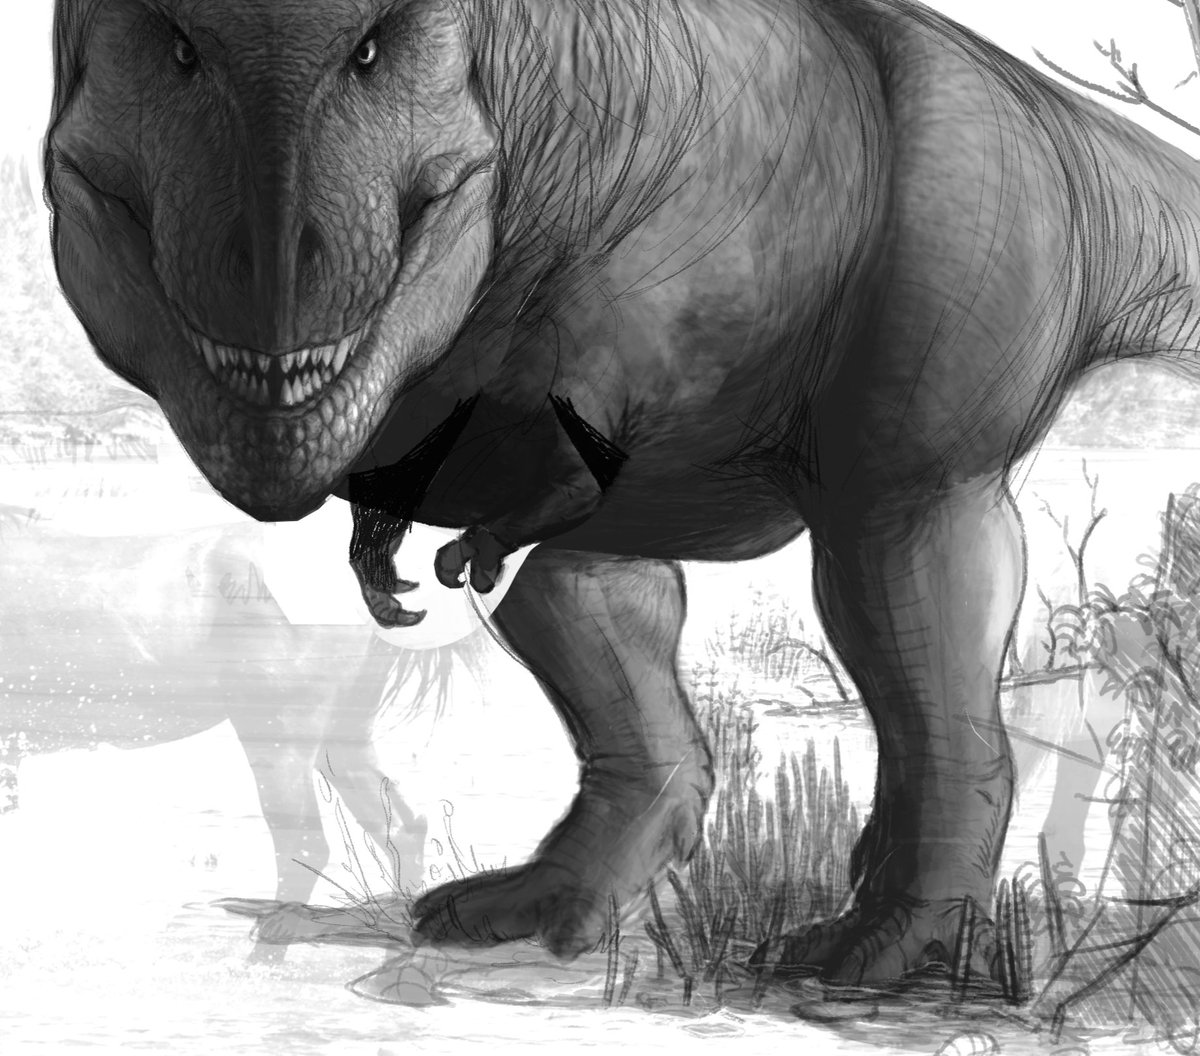 For #FossilFriday I'm revisiting an old sketch I plan to finish with 2 other illustrations this year. It's been a slow start coming back and finding my earrings. I love BW. #Tyrannosaurus